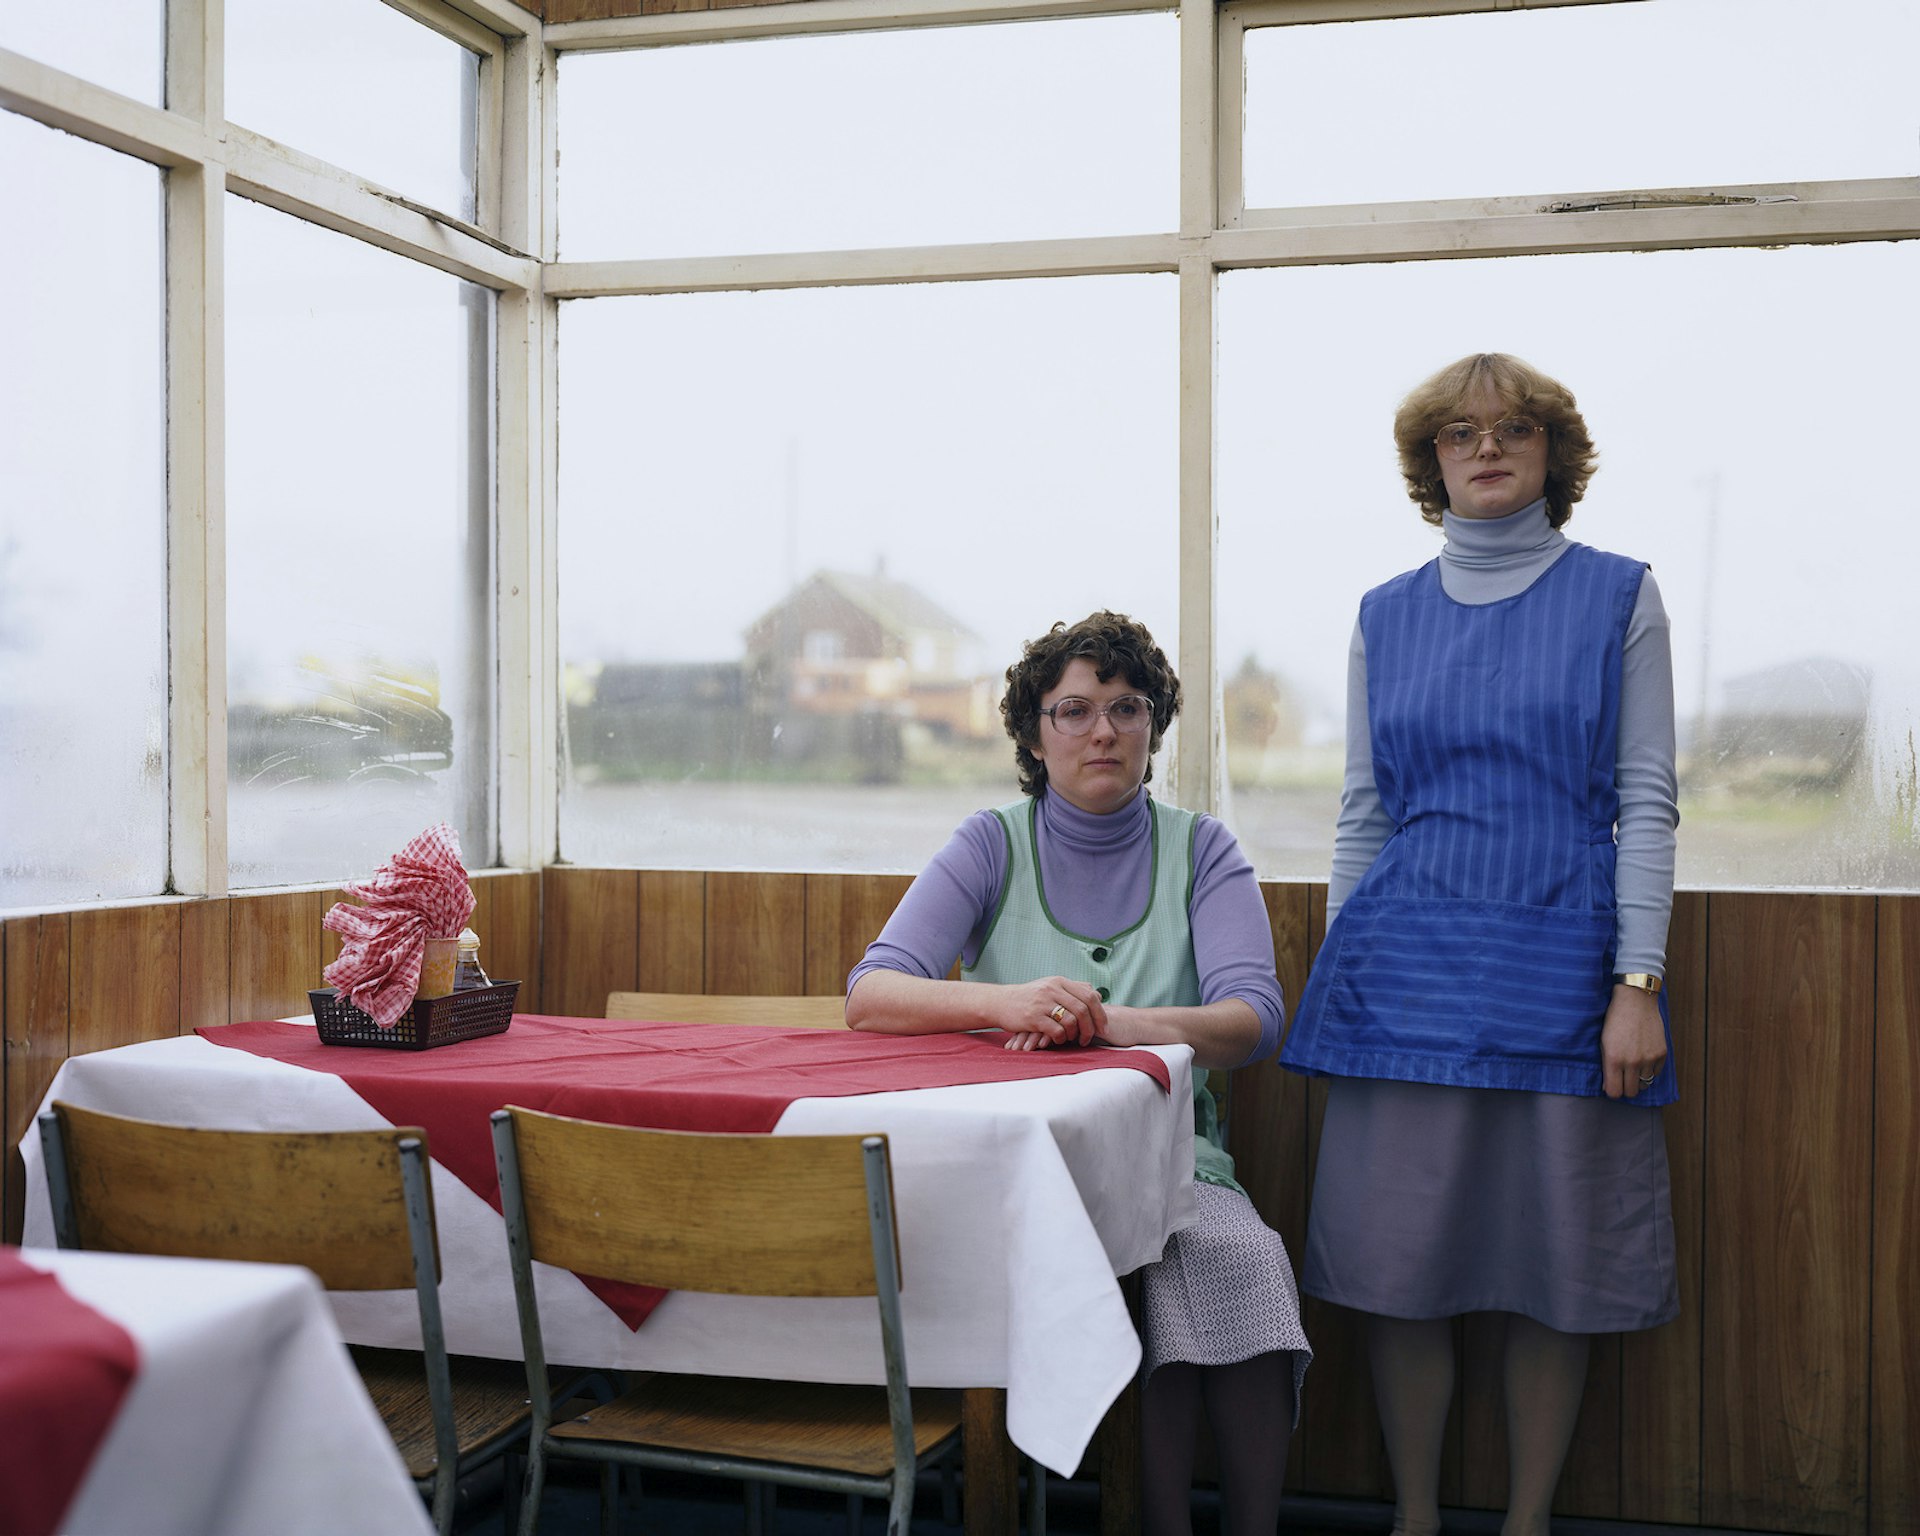 Evocative shots of an '80s road trip down the A1